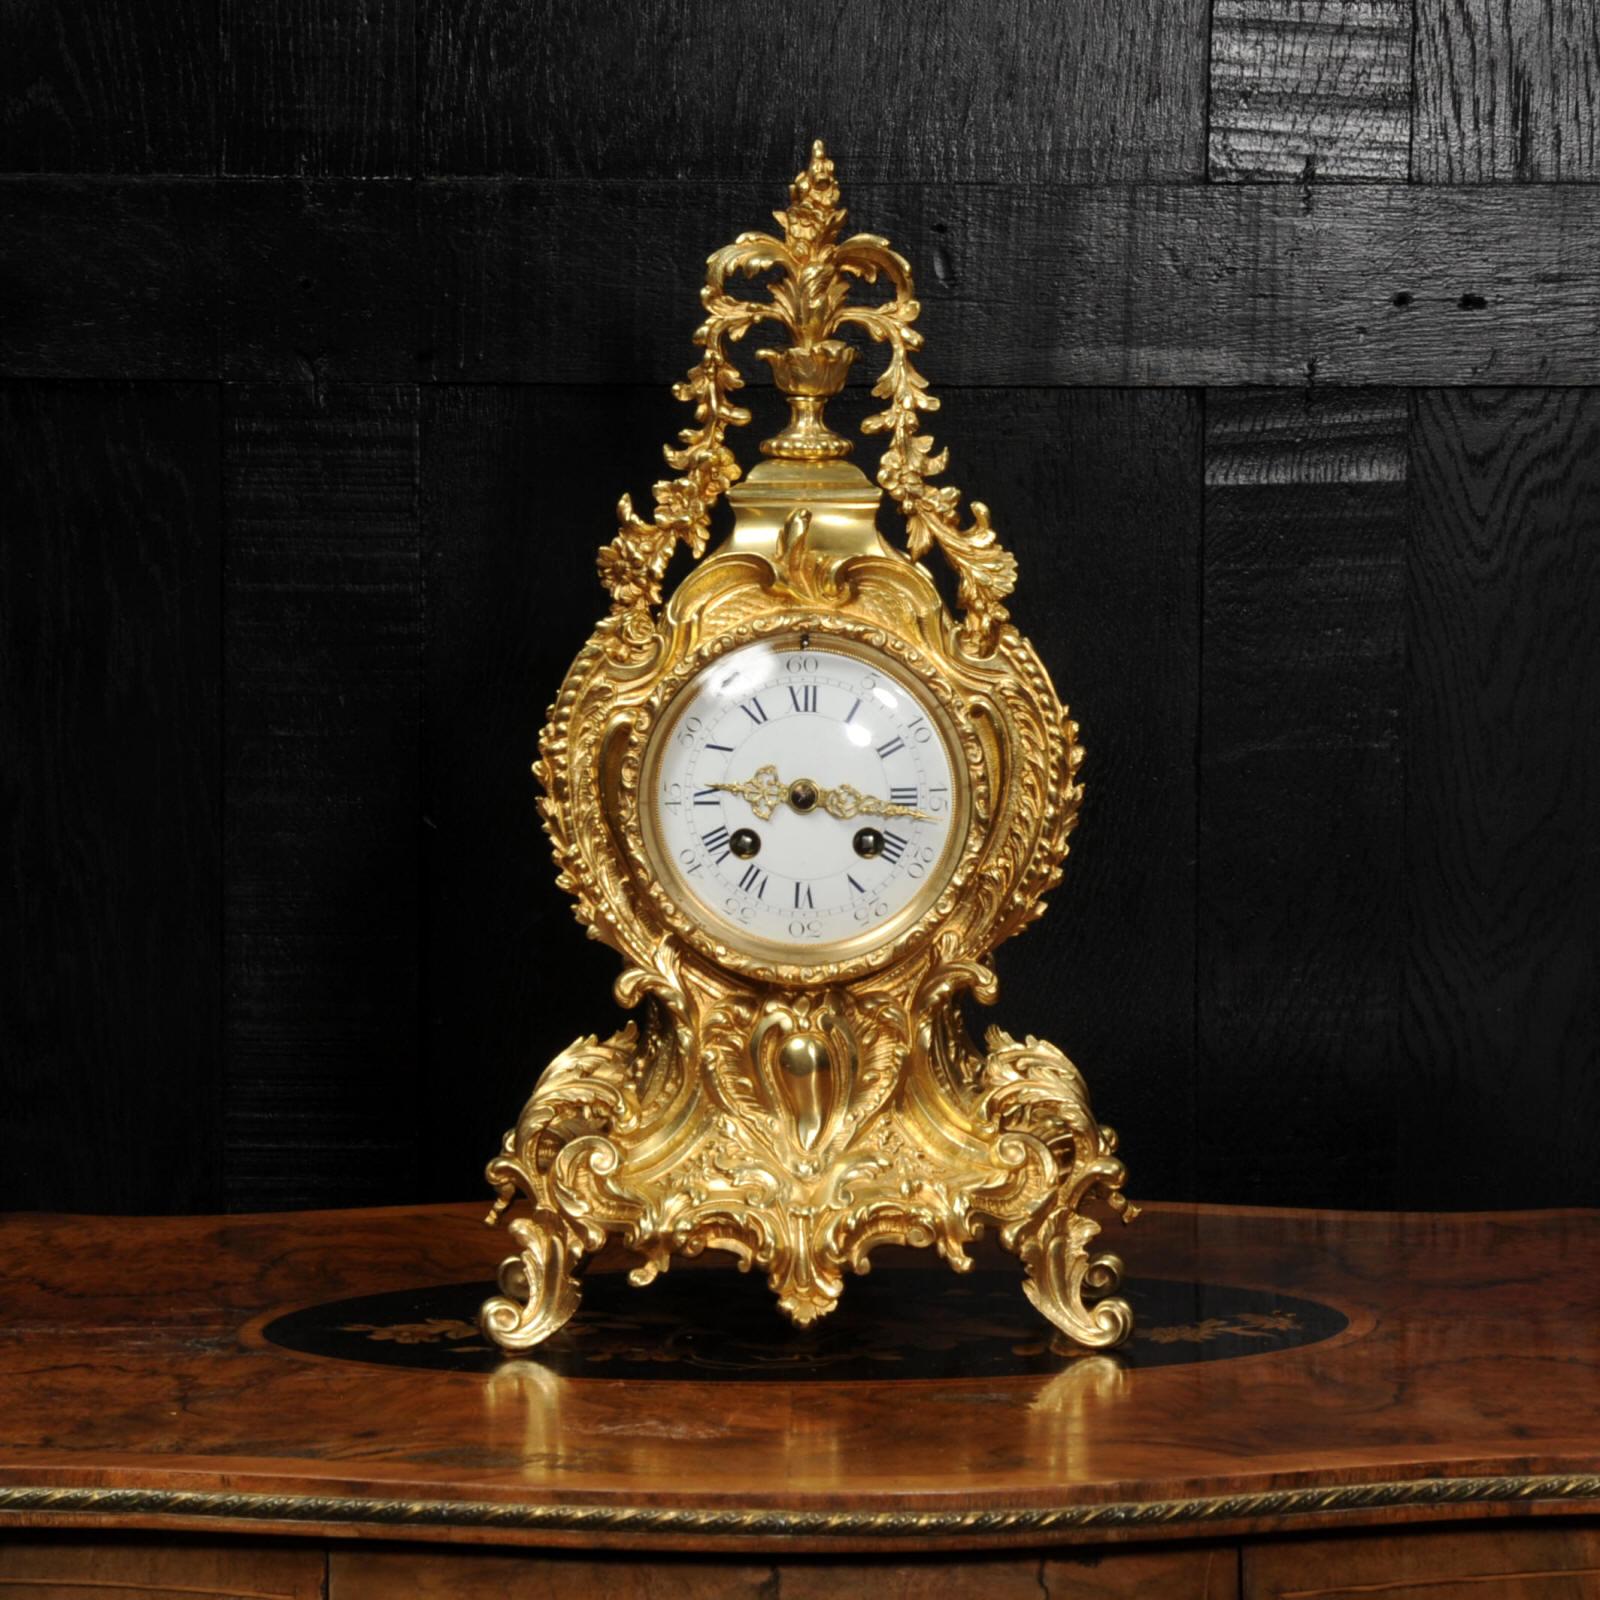 A stunning original antique French Rococo clock. Beautifully made in gilded bronze, waisted case decorated with 'c' scrolls, acanthus leaves and abundant floral swags tumbling from the leafy finial.

The large dial is porcelain enamel on copper